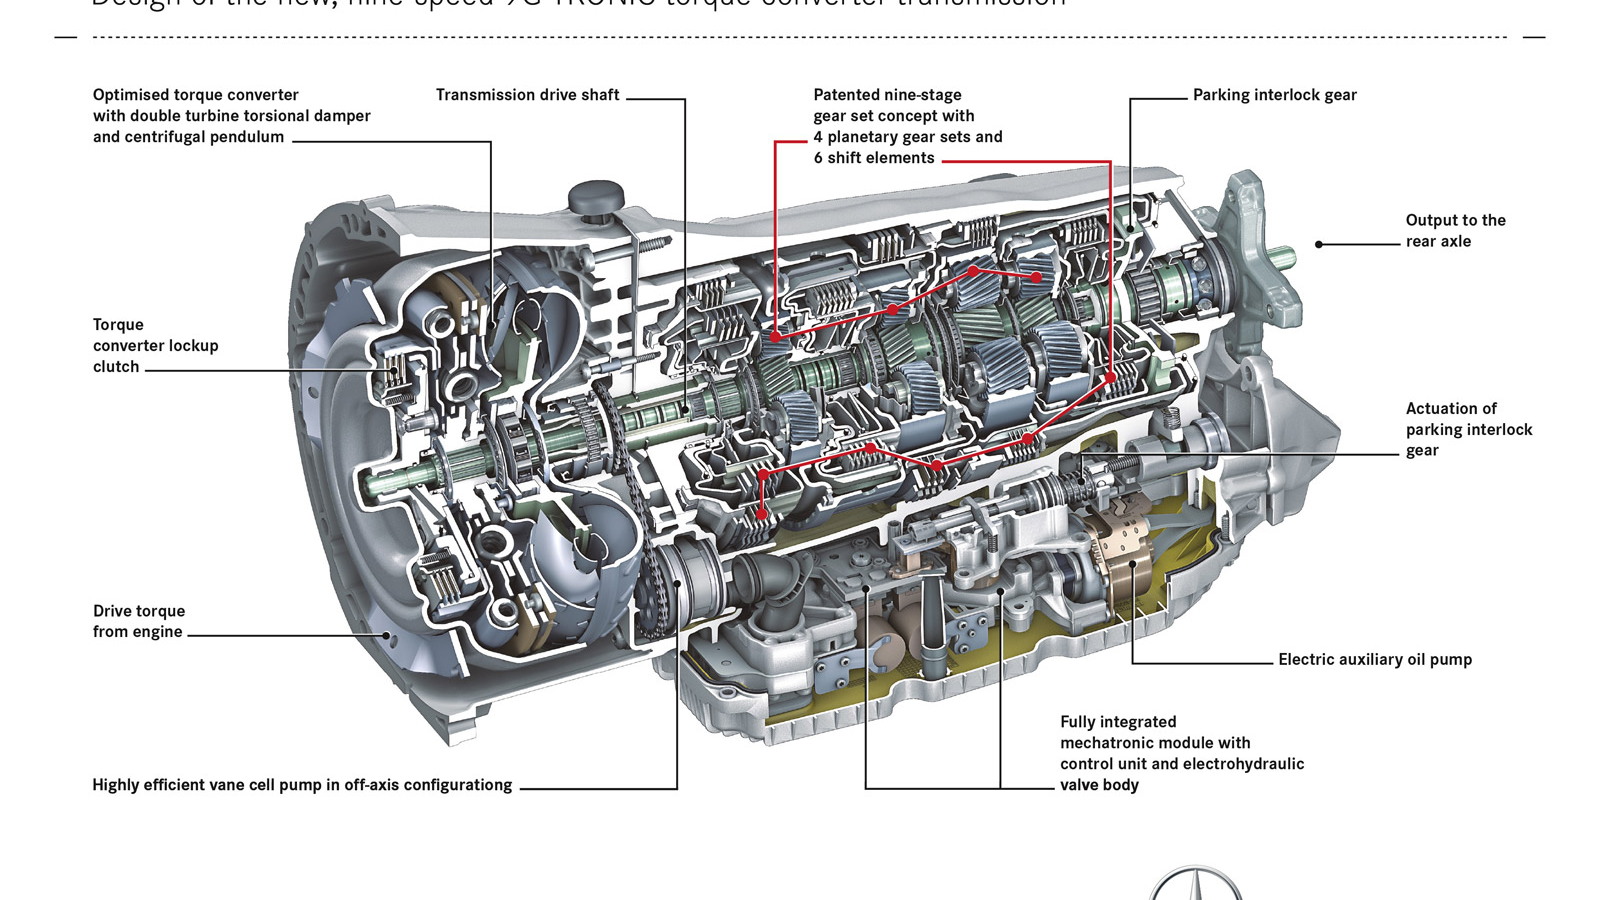 Mercedes-Benz’s 9G-TRONIC nine-speed automatic transmission